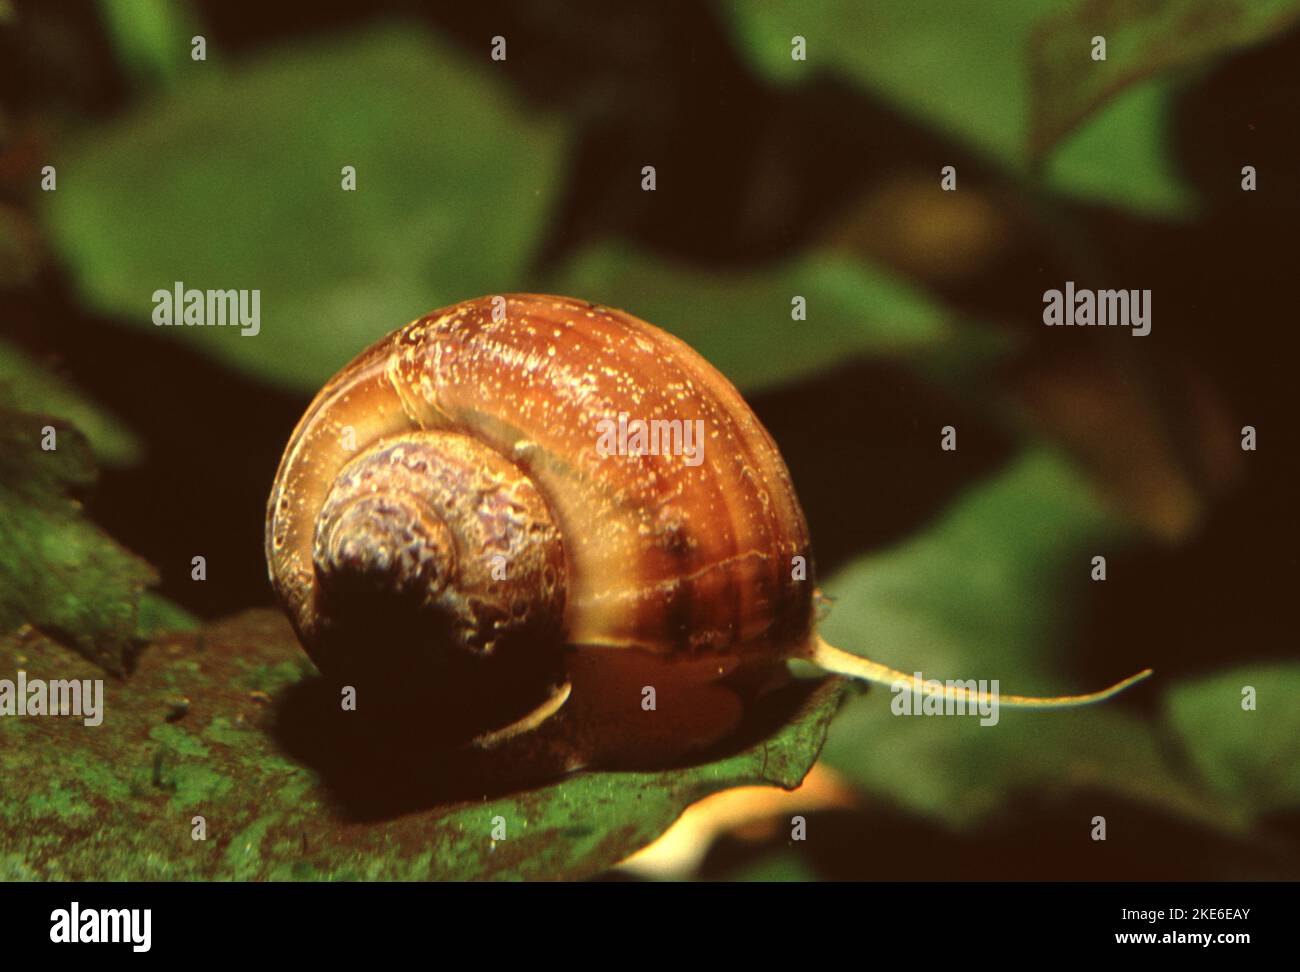 Pomacea canaliculata, commonly known as the golden apple snail or the channeled apple snail, is a species of large freshwater snail Stock Photo